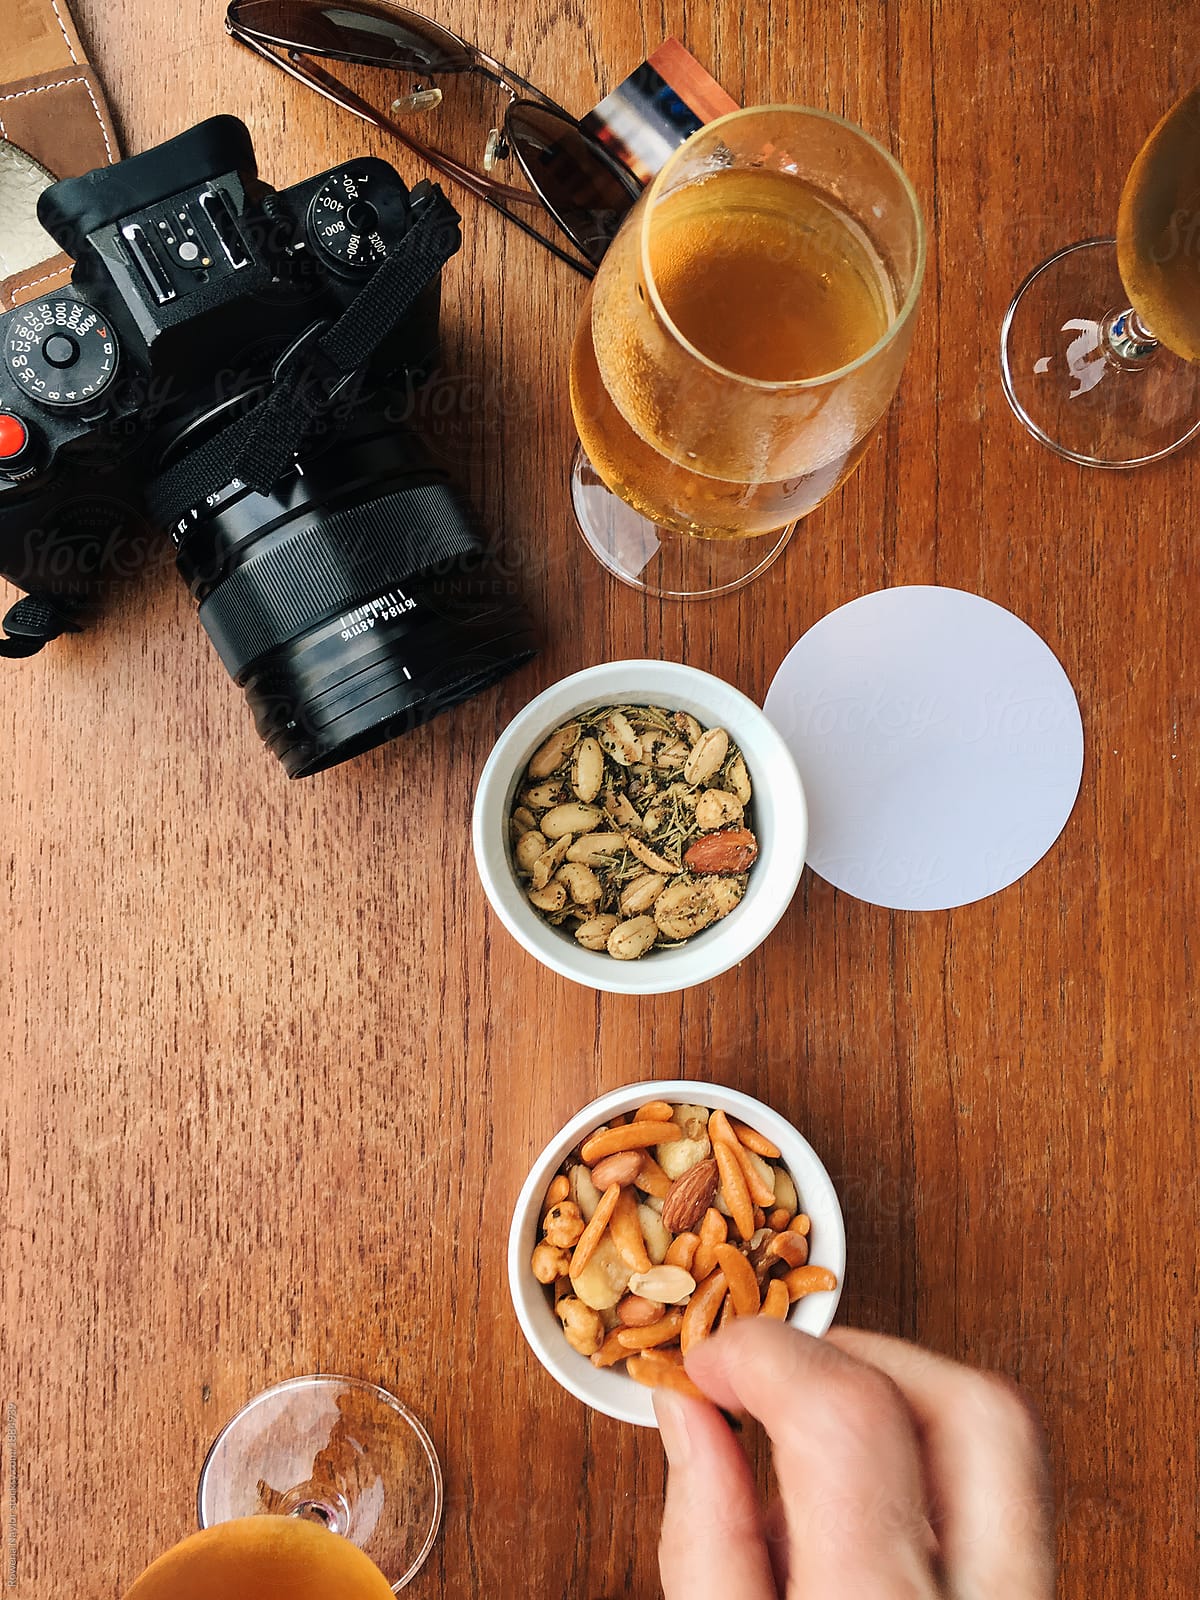 Camera, berr and nuts on table at micro brewery